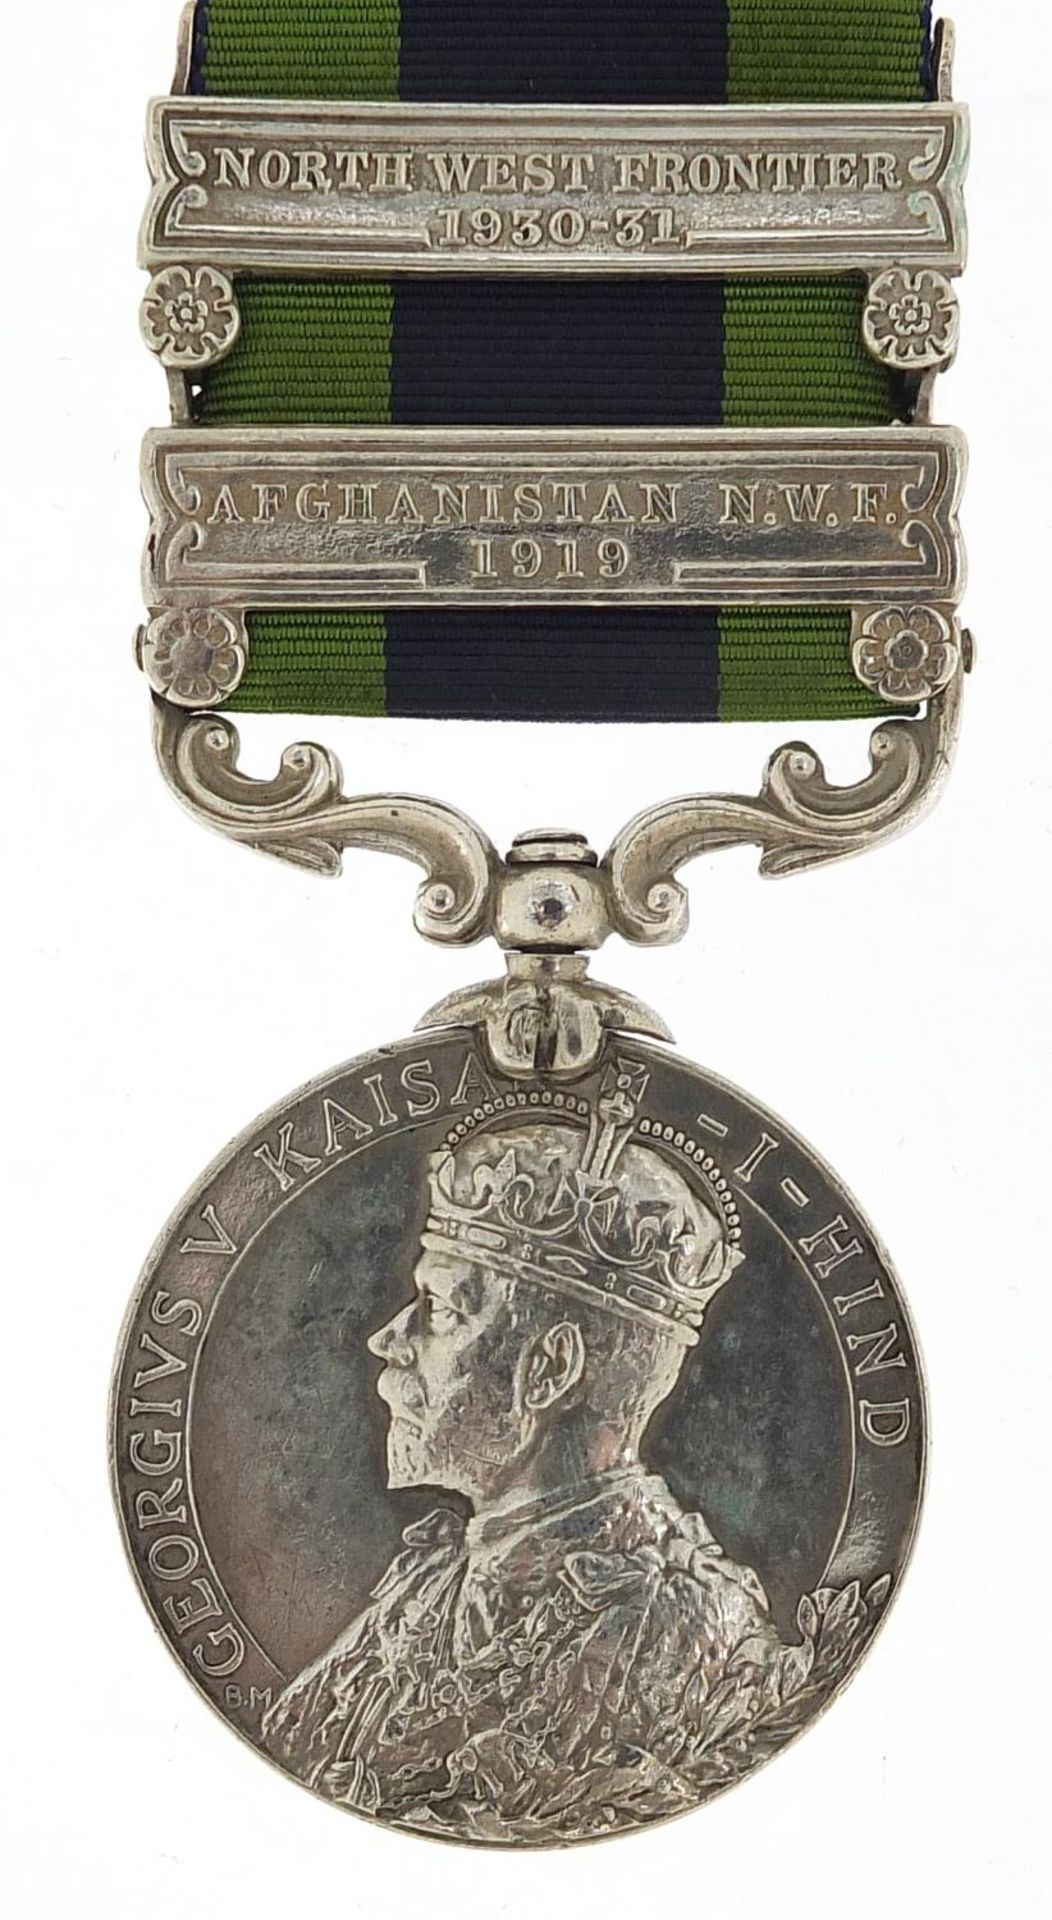 British military George V India General Service medal with Afghanistan N.W.F. 1919 and North West